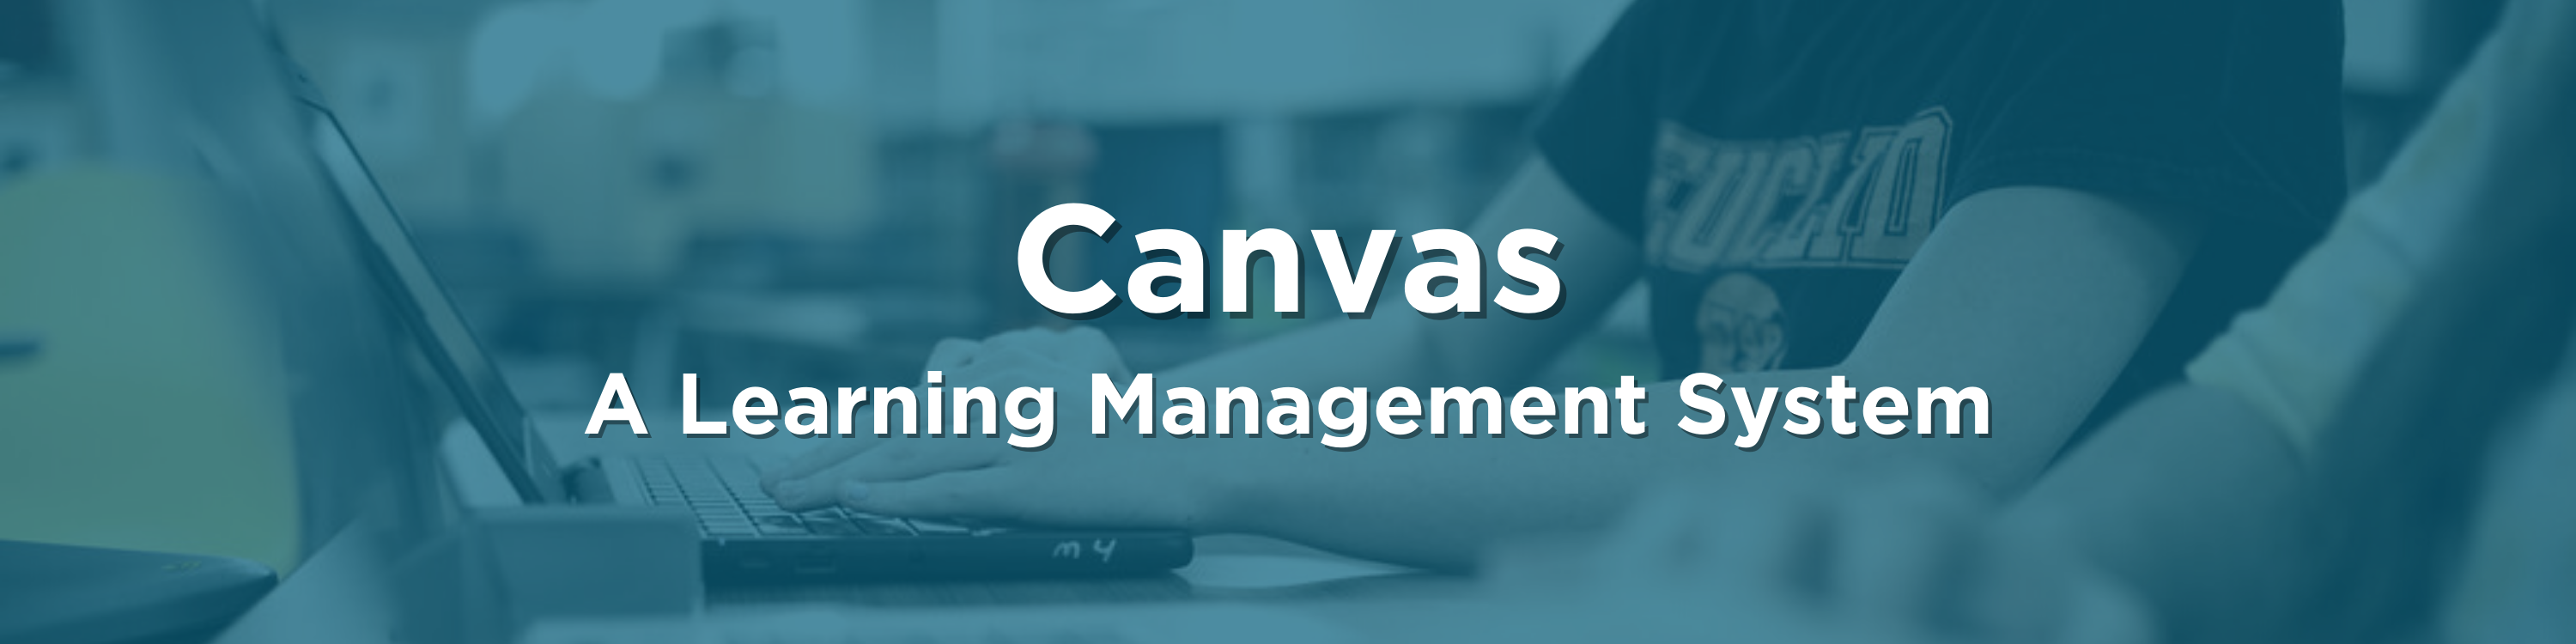 Canvas. A Learning Management System